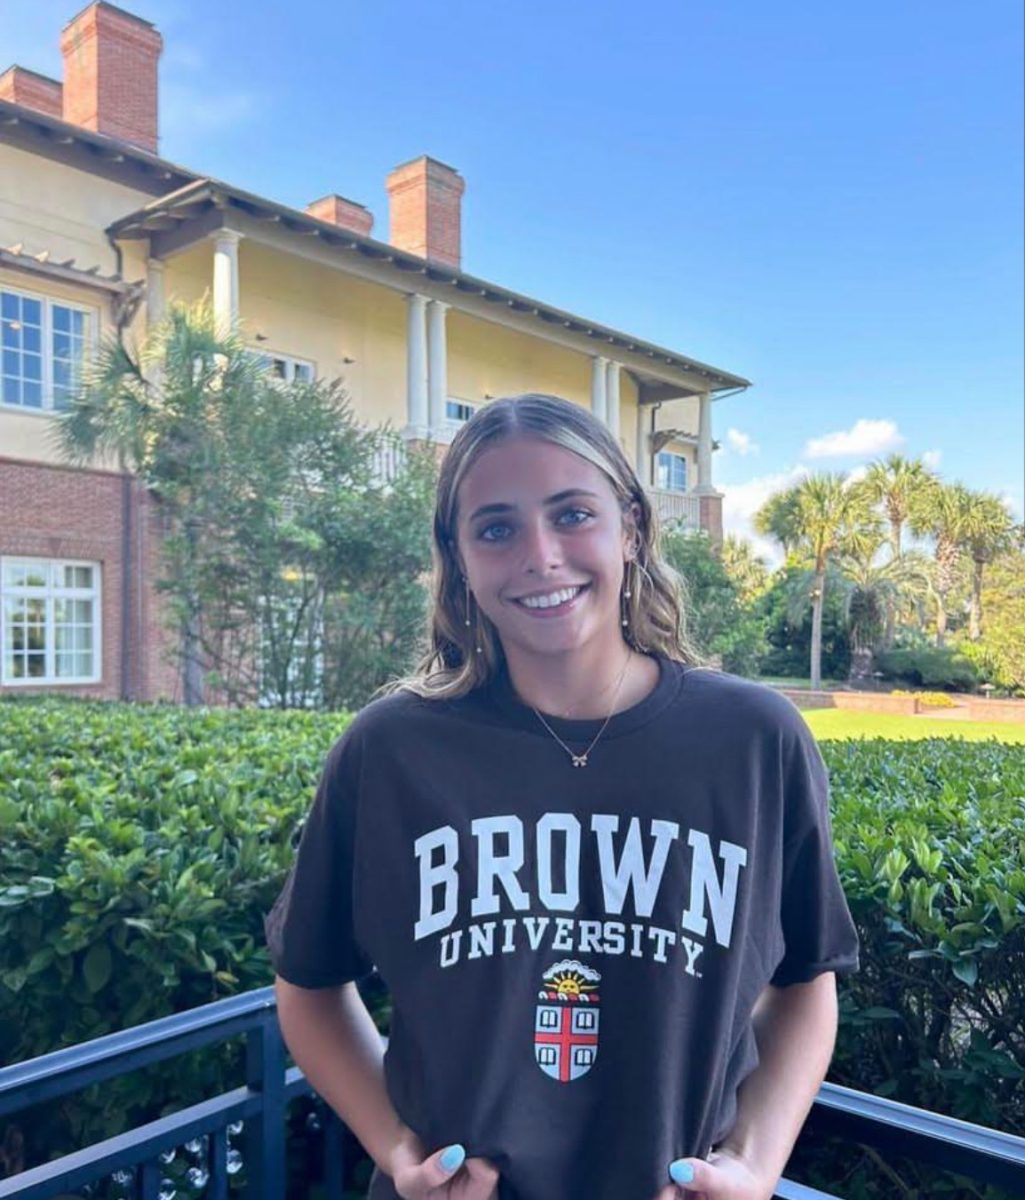 Elizabeth+Sessa%2C+senior%2C+commits+to+Brown+University+for+volleyball.